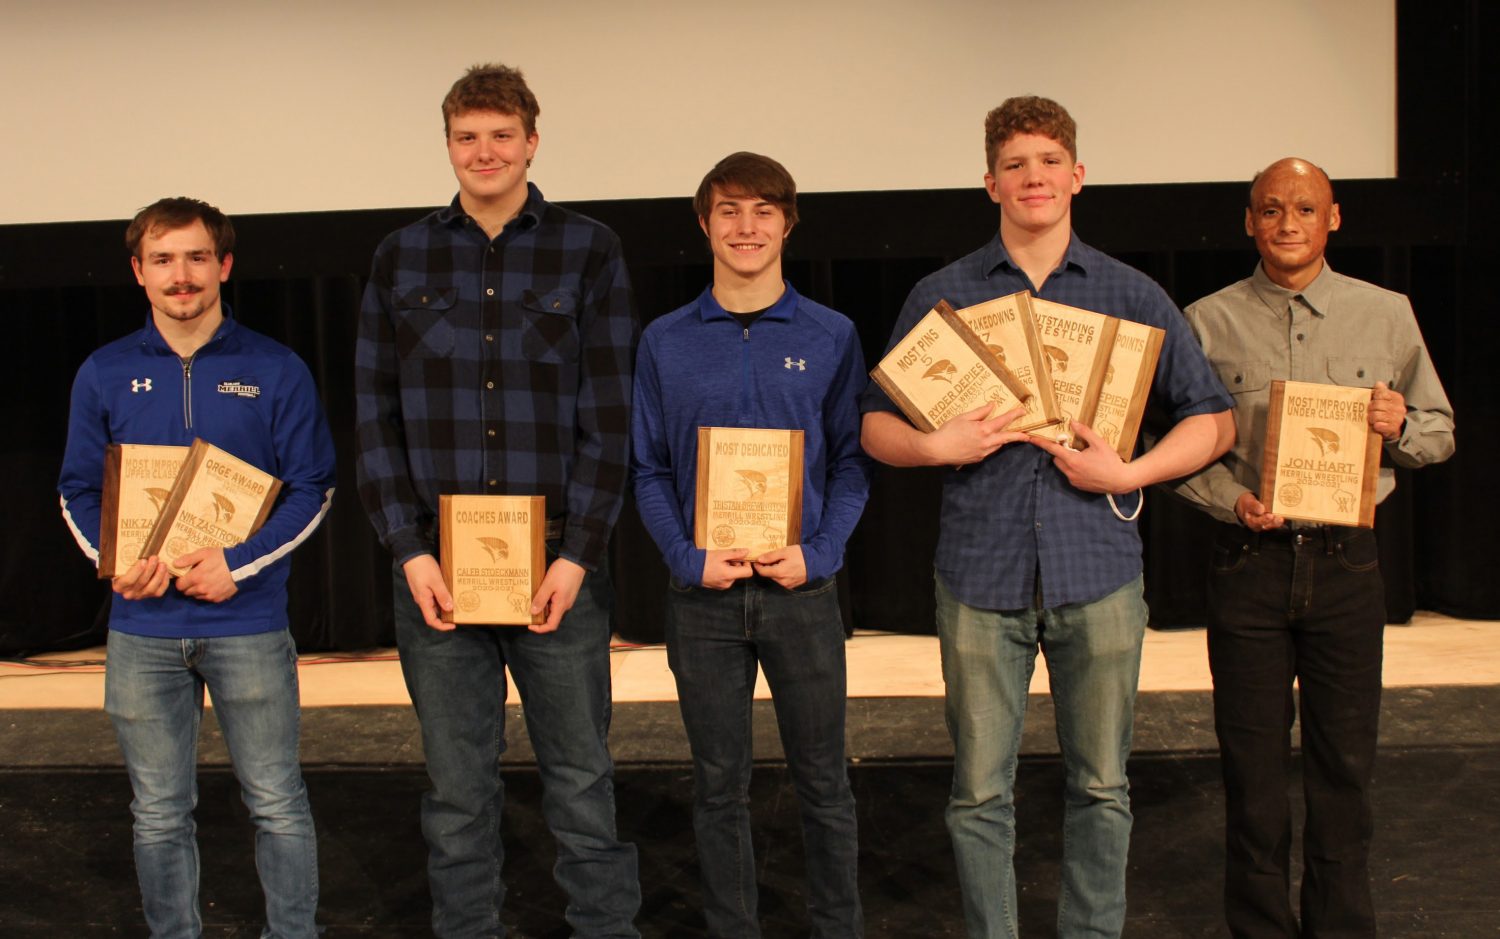 Merrill wrestlers receive awards at 61st annual banquet